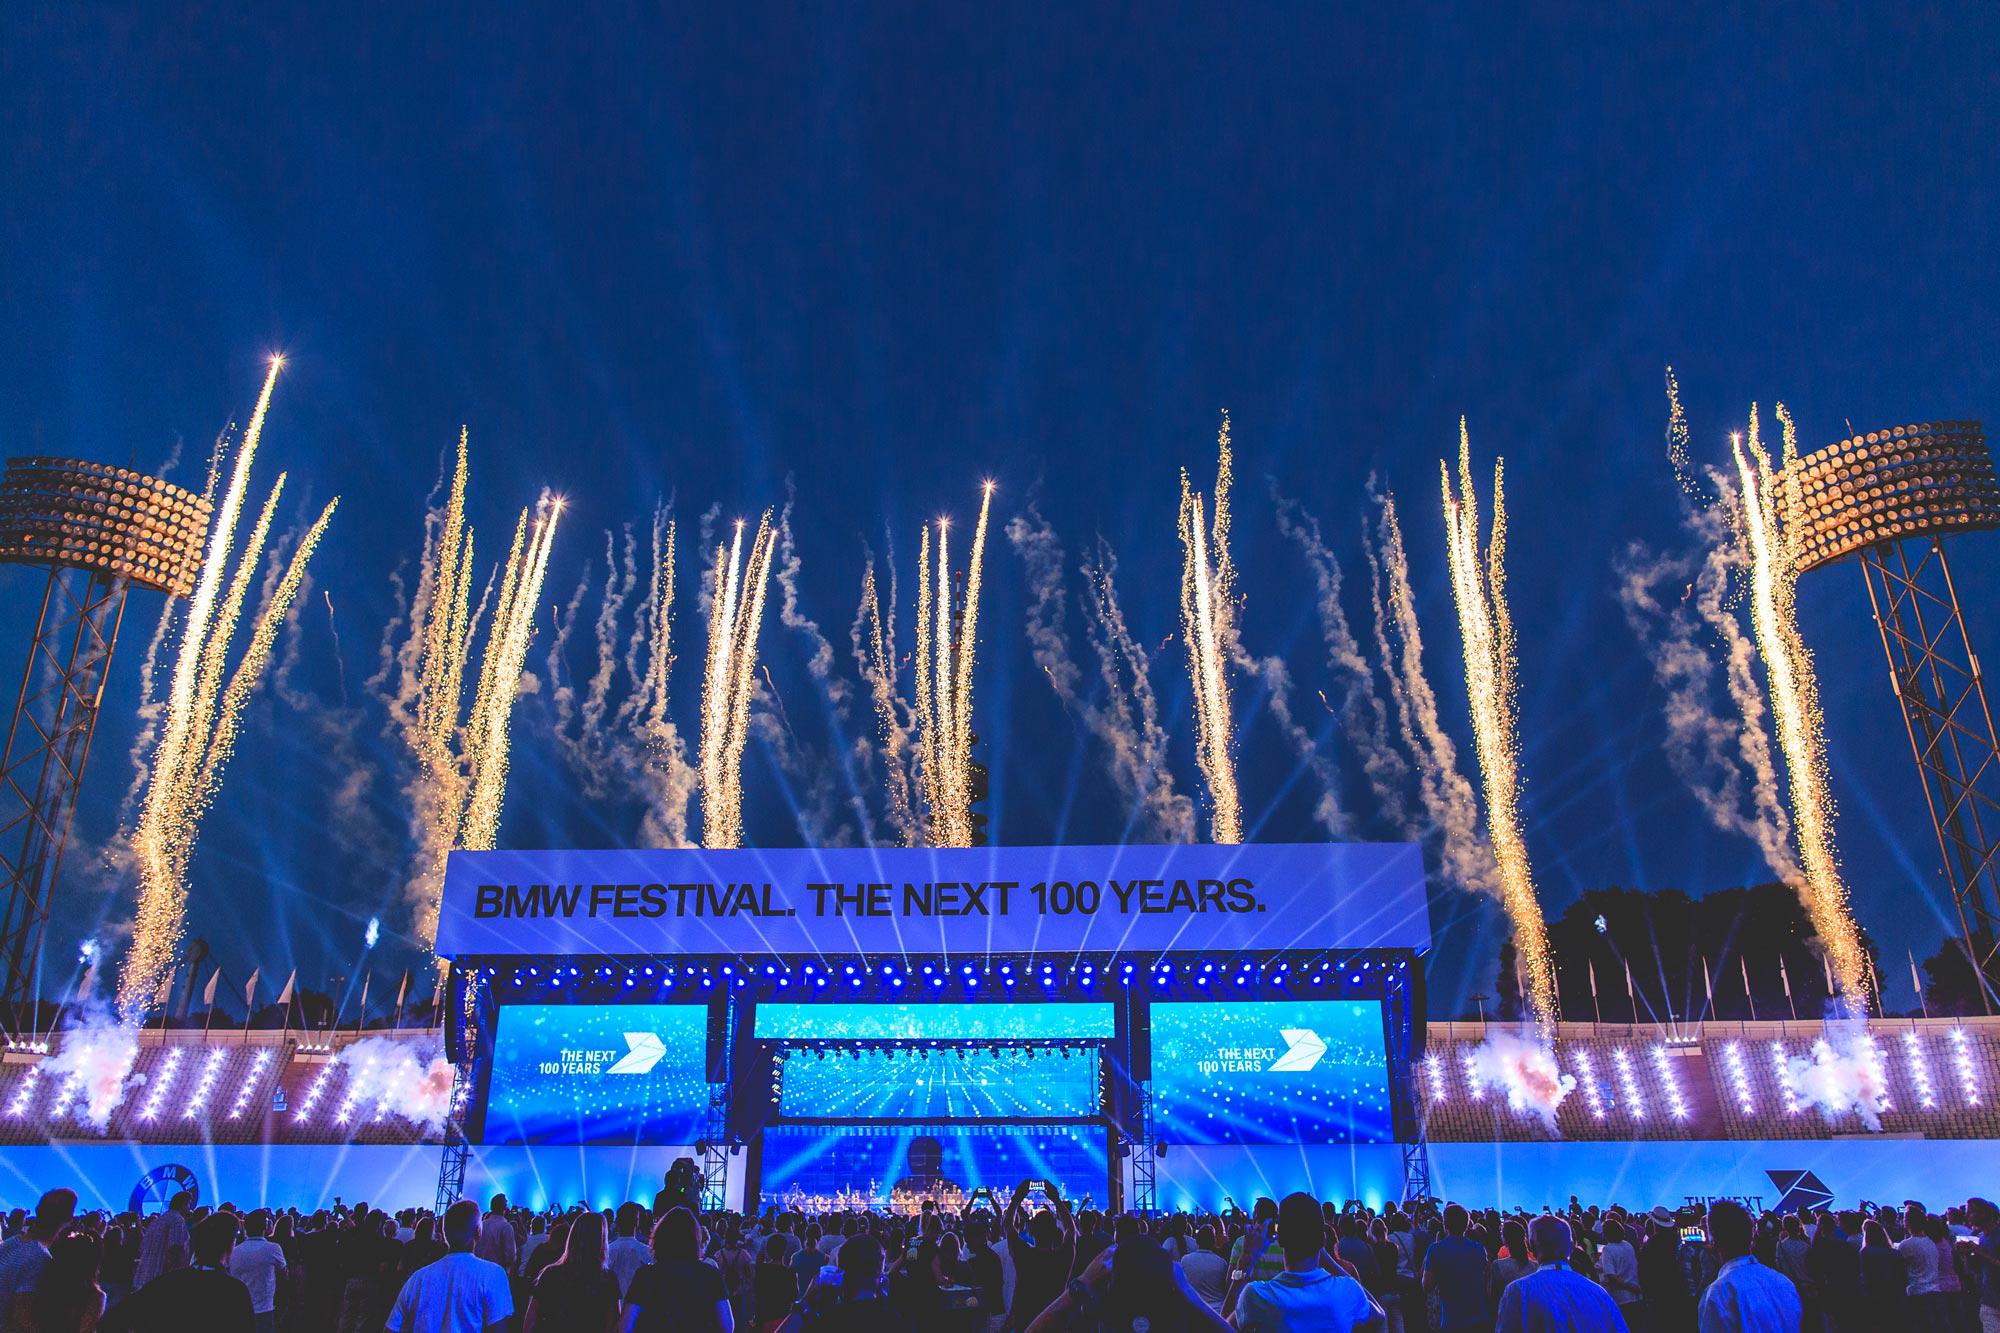 Fireworks burst upwards into a blue dusky sky above a stage that reads "BMW FESTIVAL. THE NEXT 100 YEARS." and a large crowd.